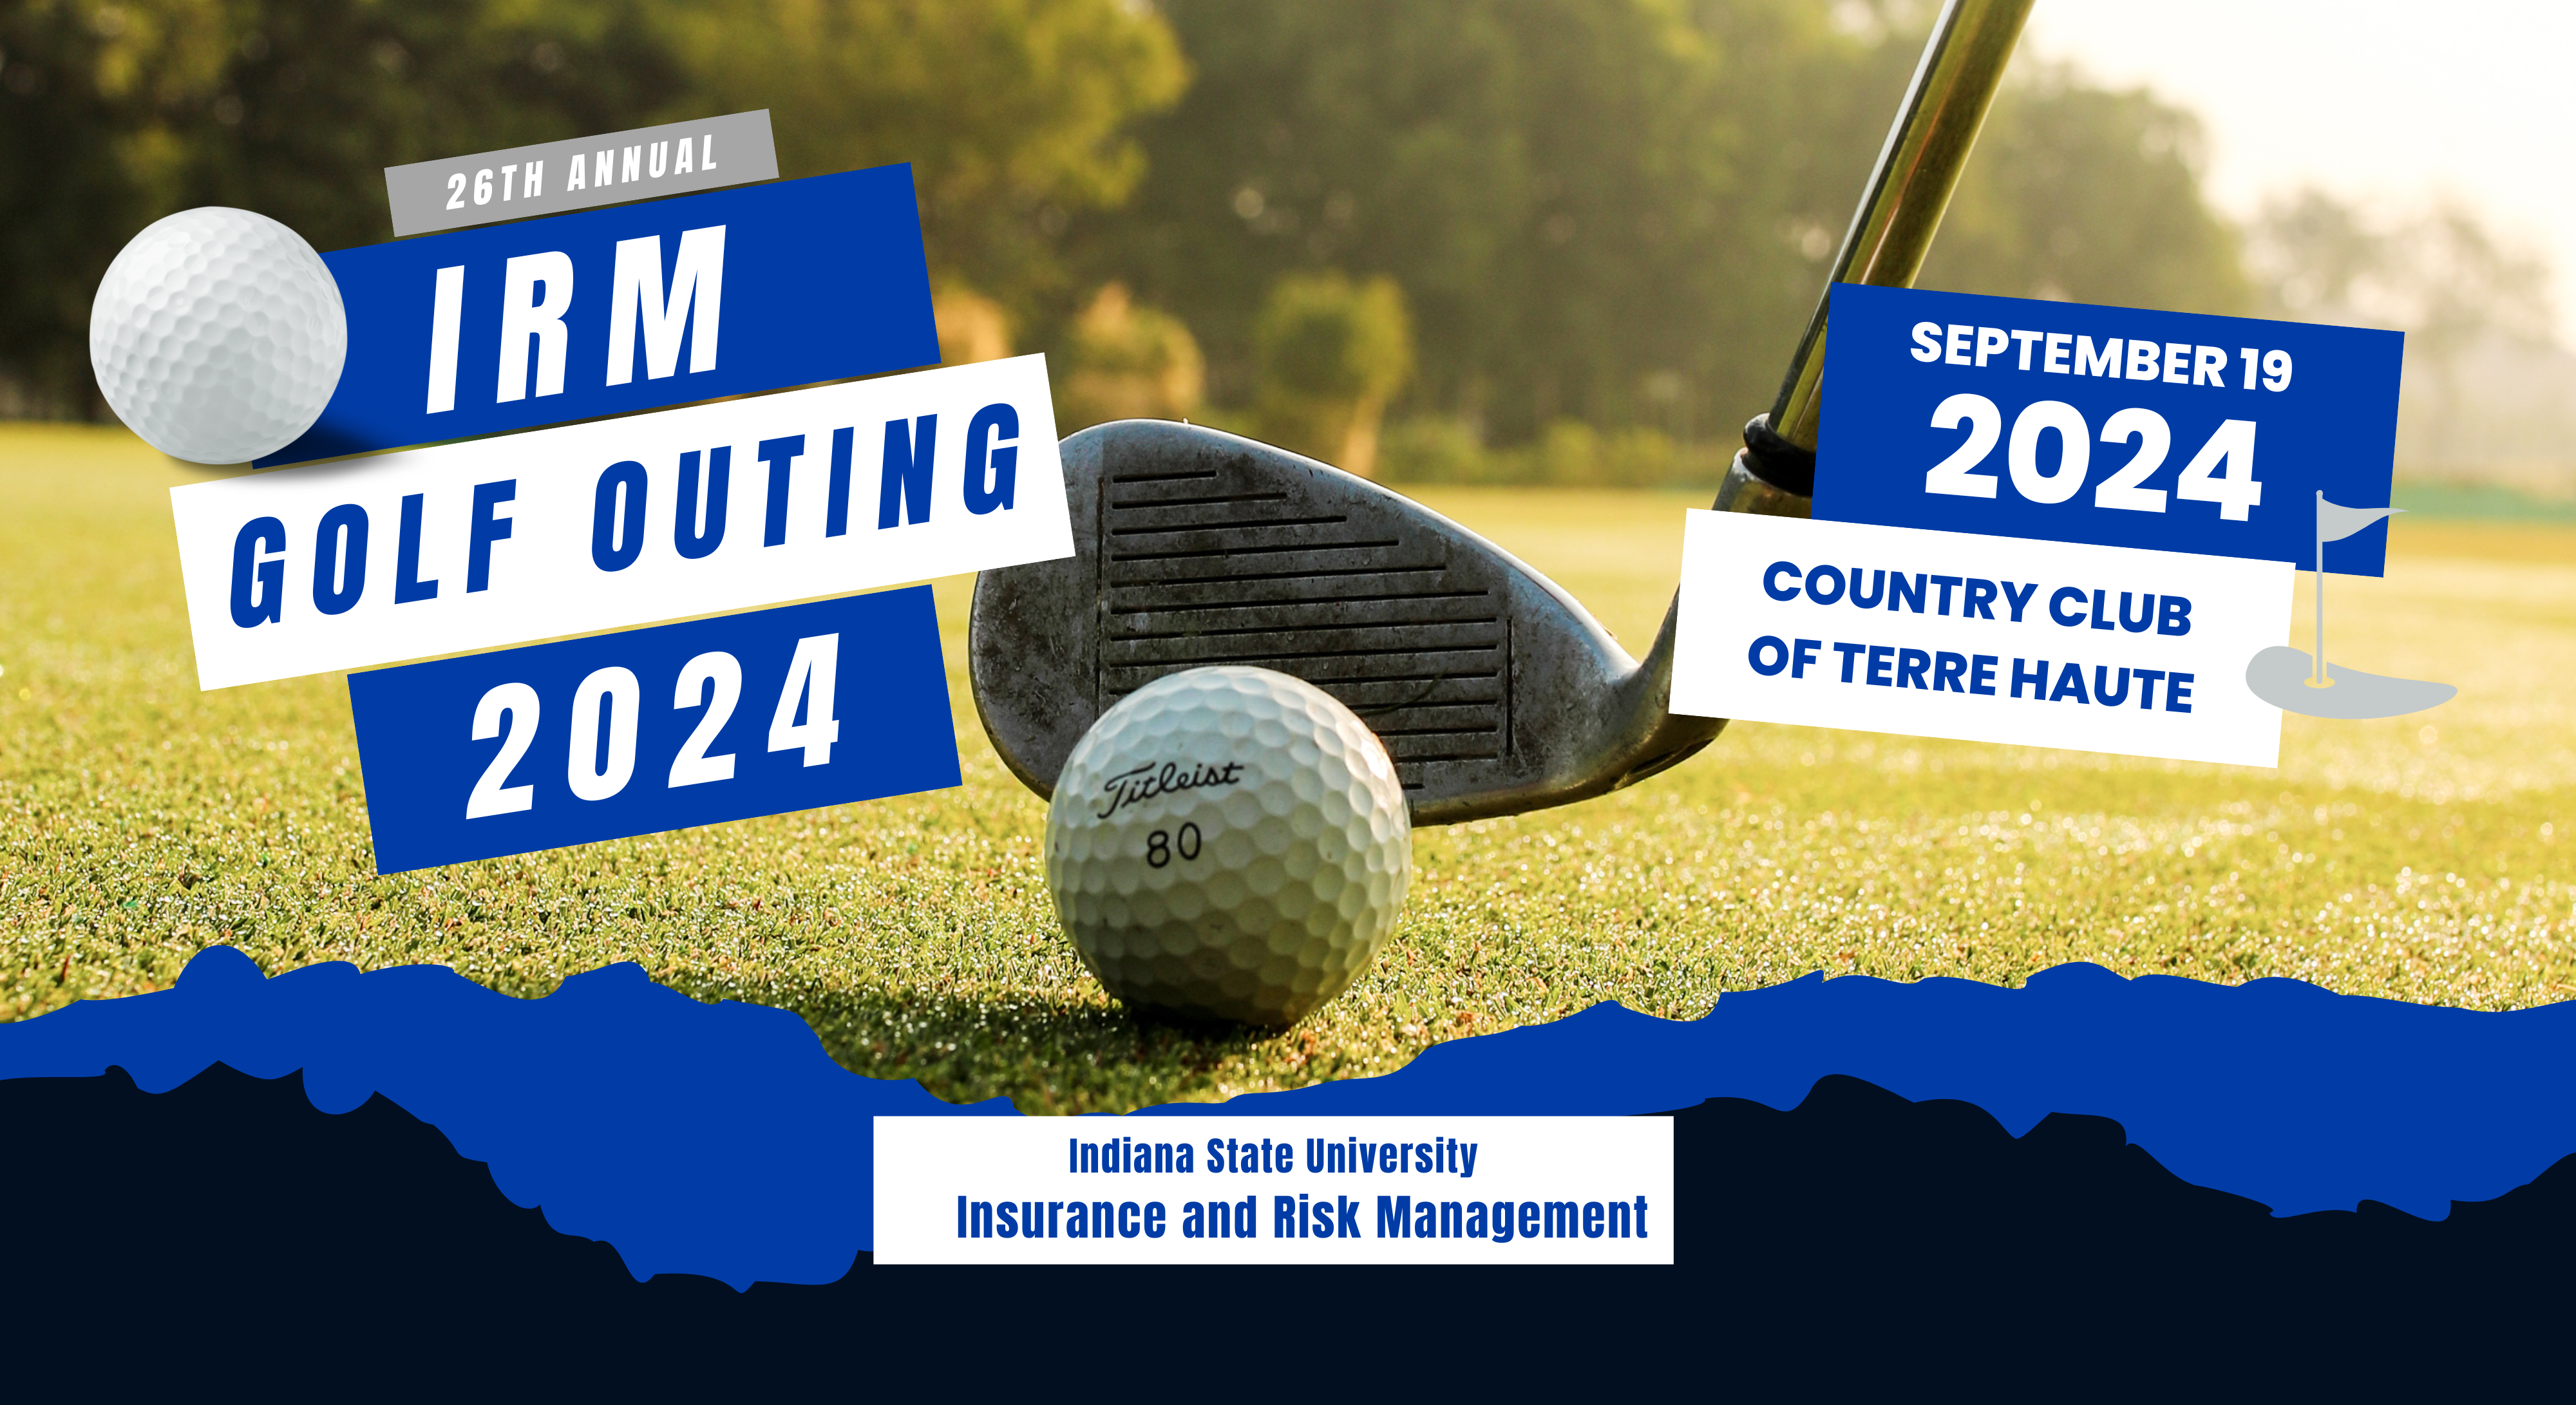 IRM Golf Outing Flyer 2024.png